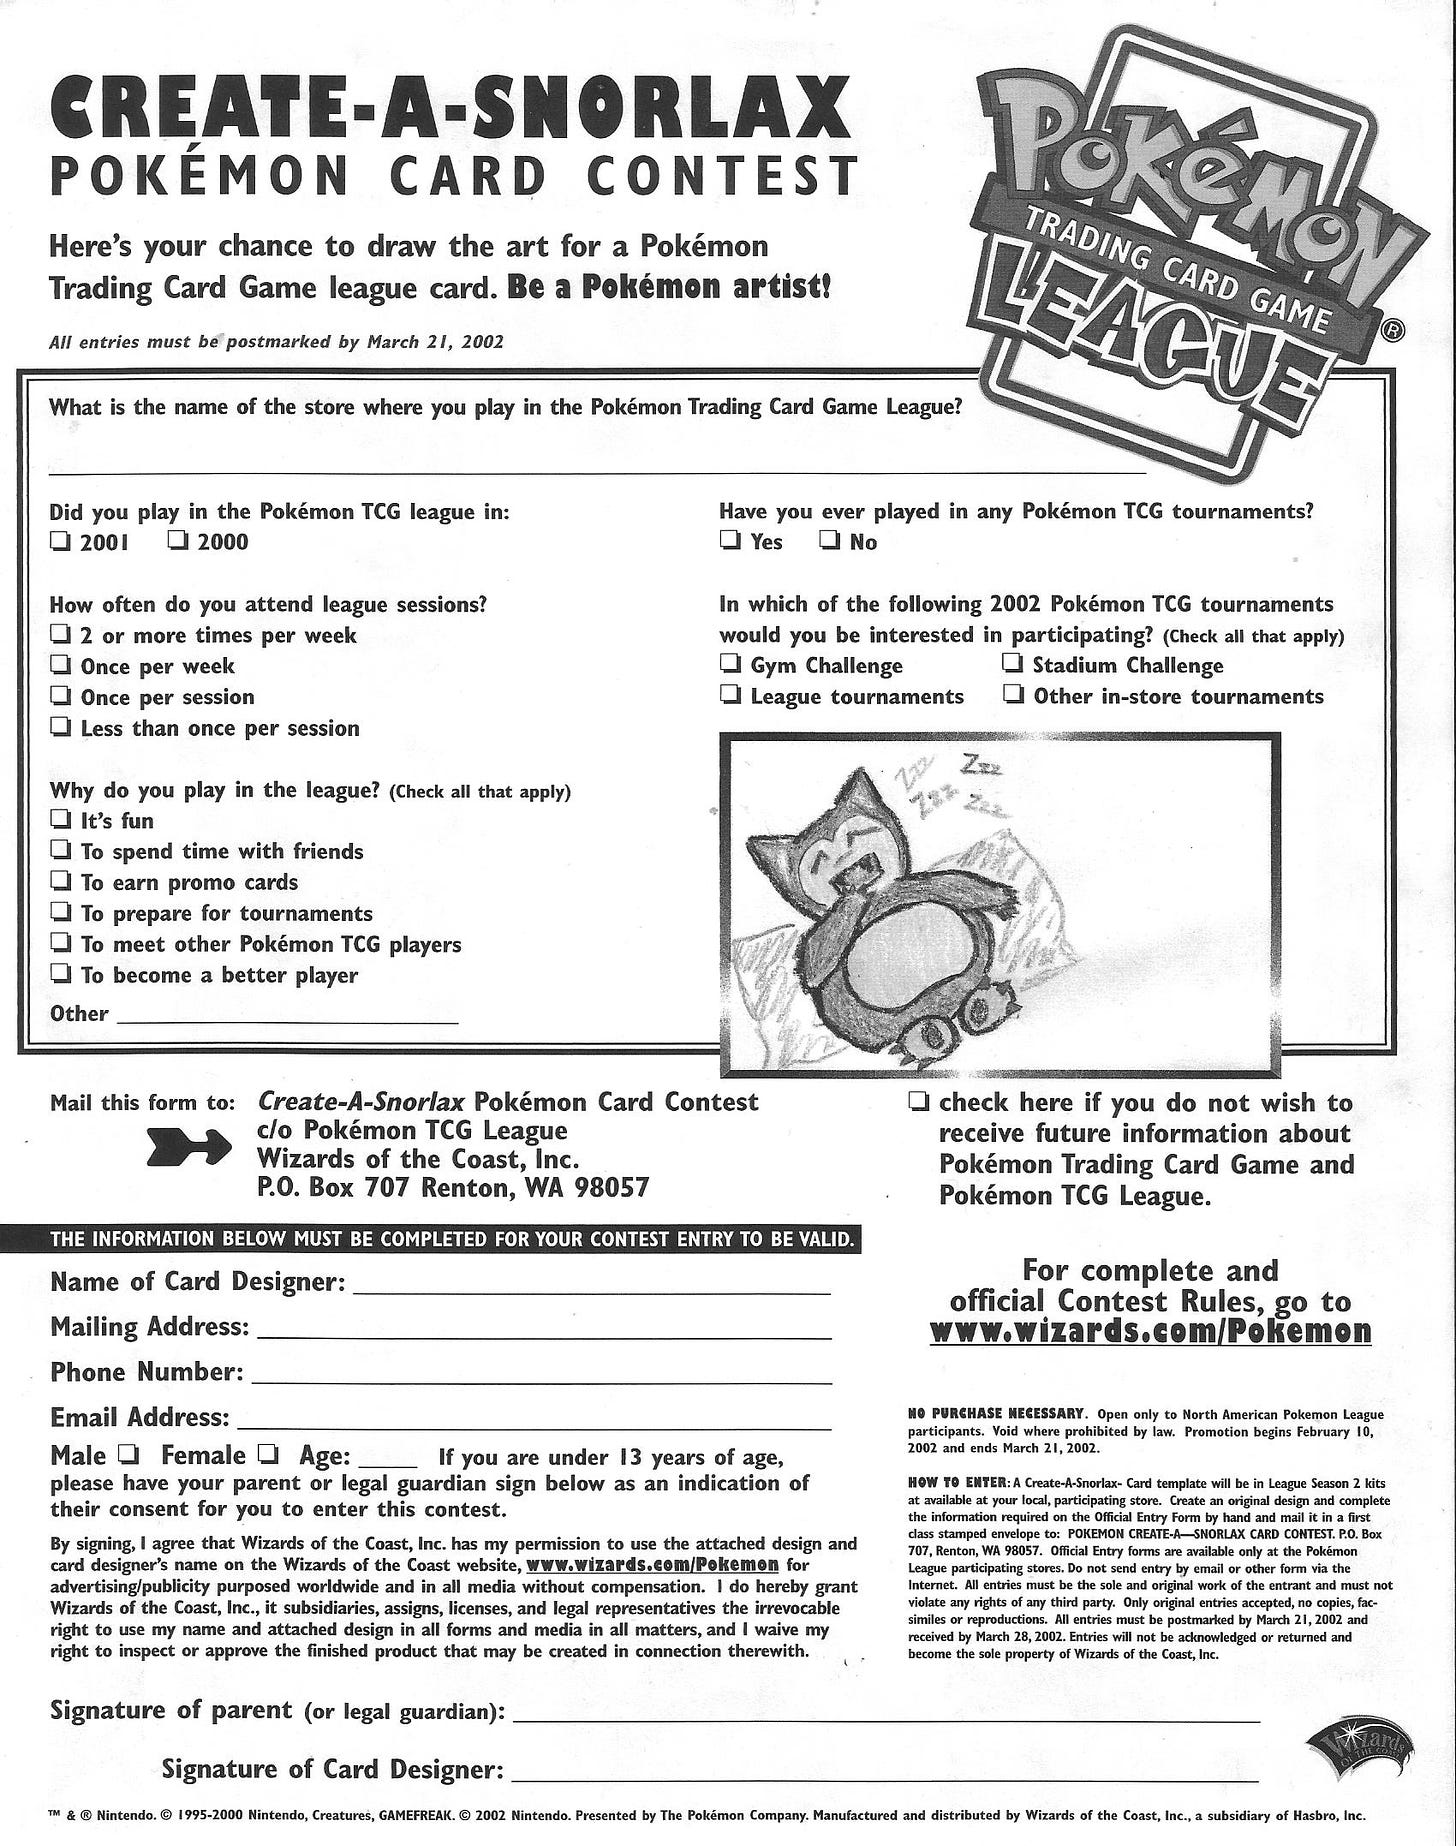 Entry forms for the Create-a-Snorlax Pokémon Card contest were distributed to Leagues across the United States and had to be received by Wizards of the Coast by March 21st 2002